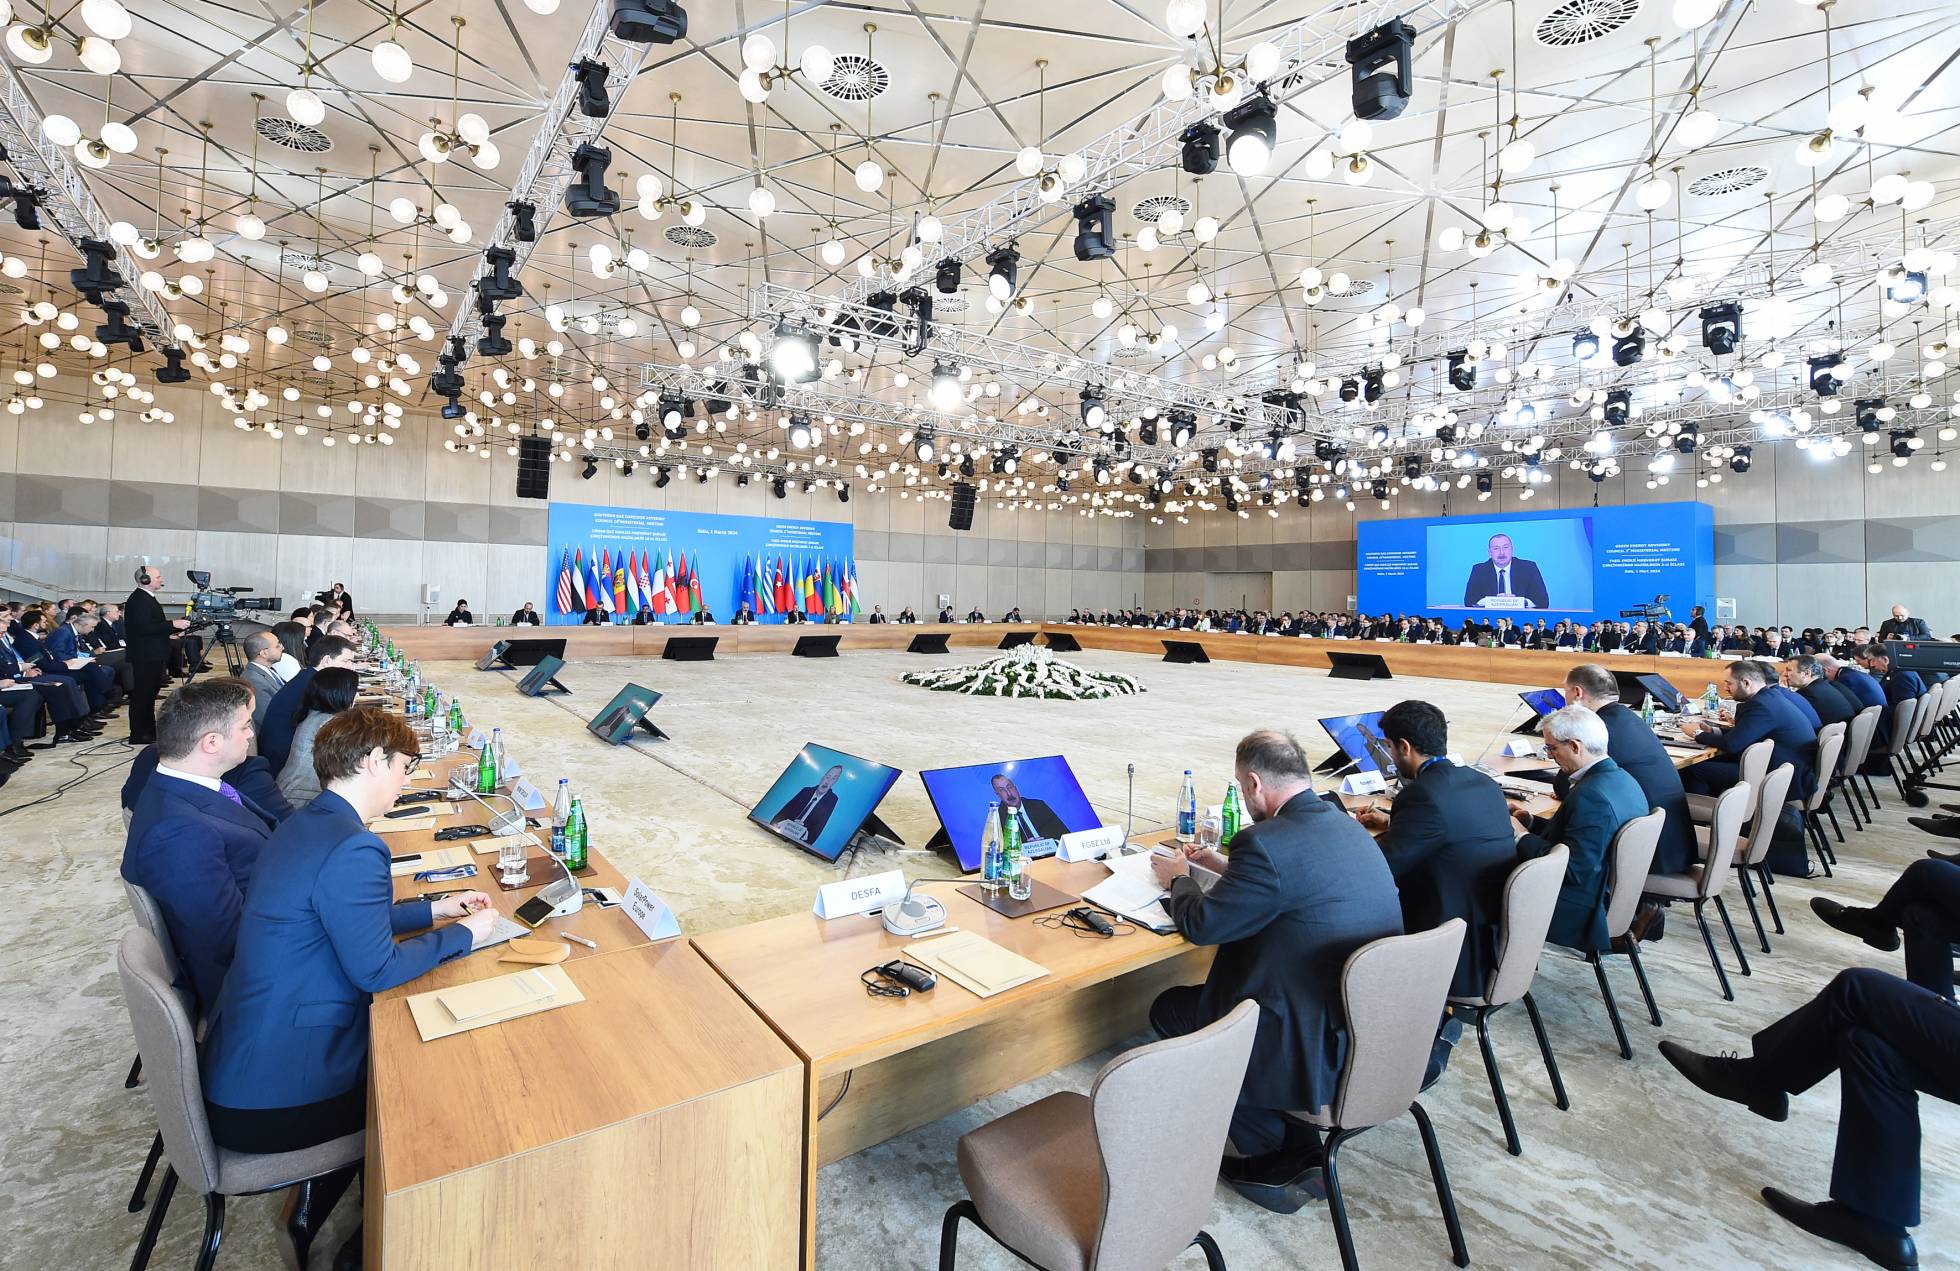 The 10th Ministerial Meeting of the Southern Gas Corridor Advisory Council and the 2nd Ministerial Meeting of the Green Energy Advisory Council continued with plenary sessions